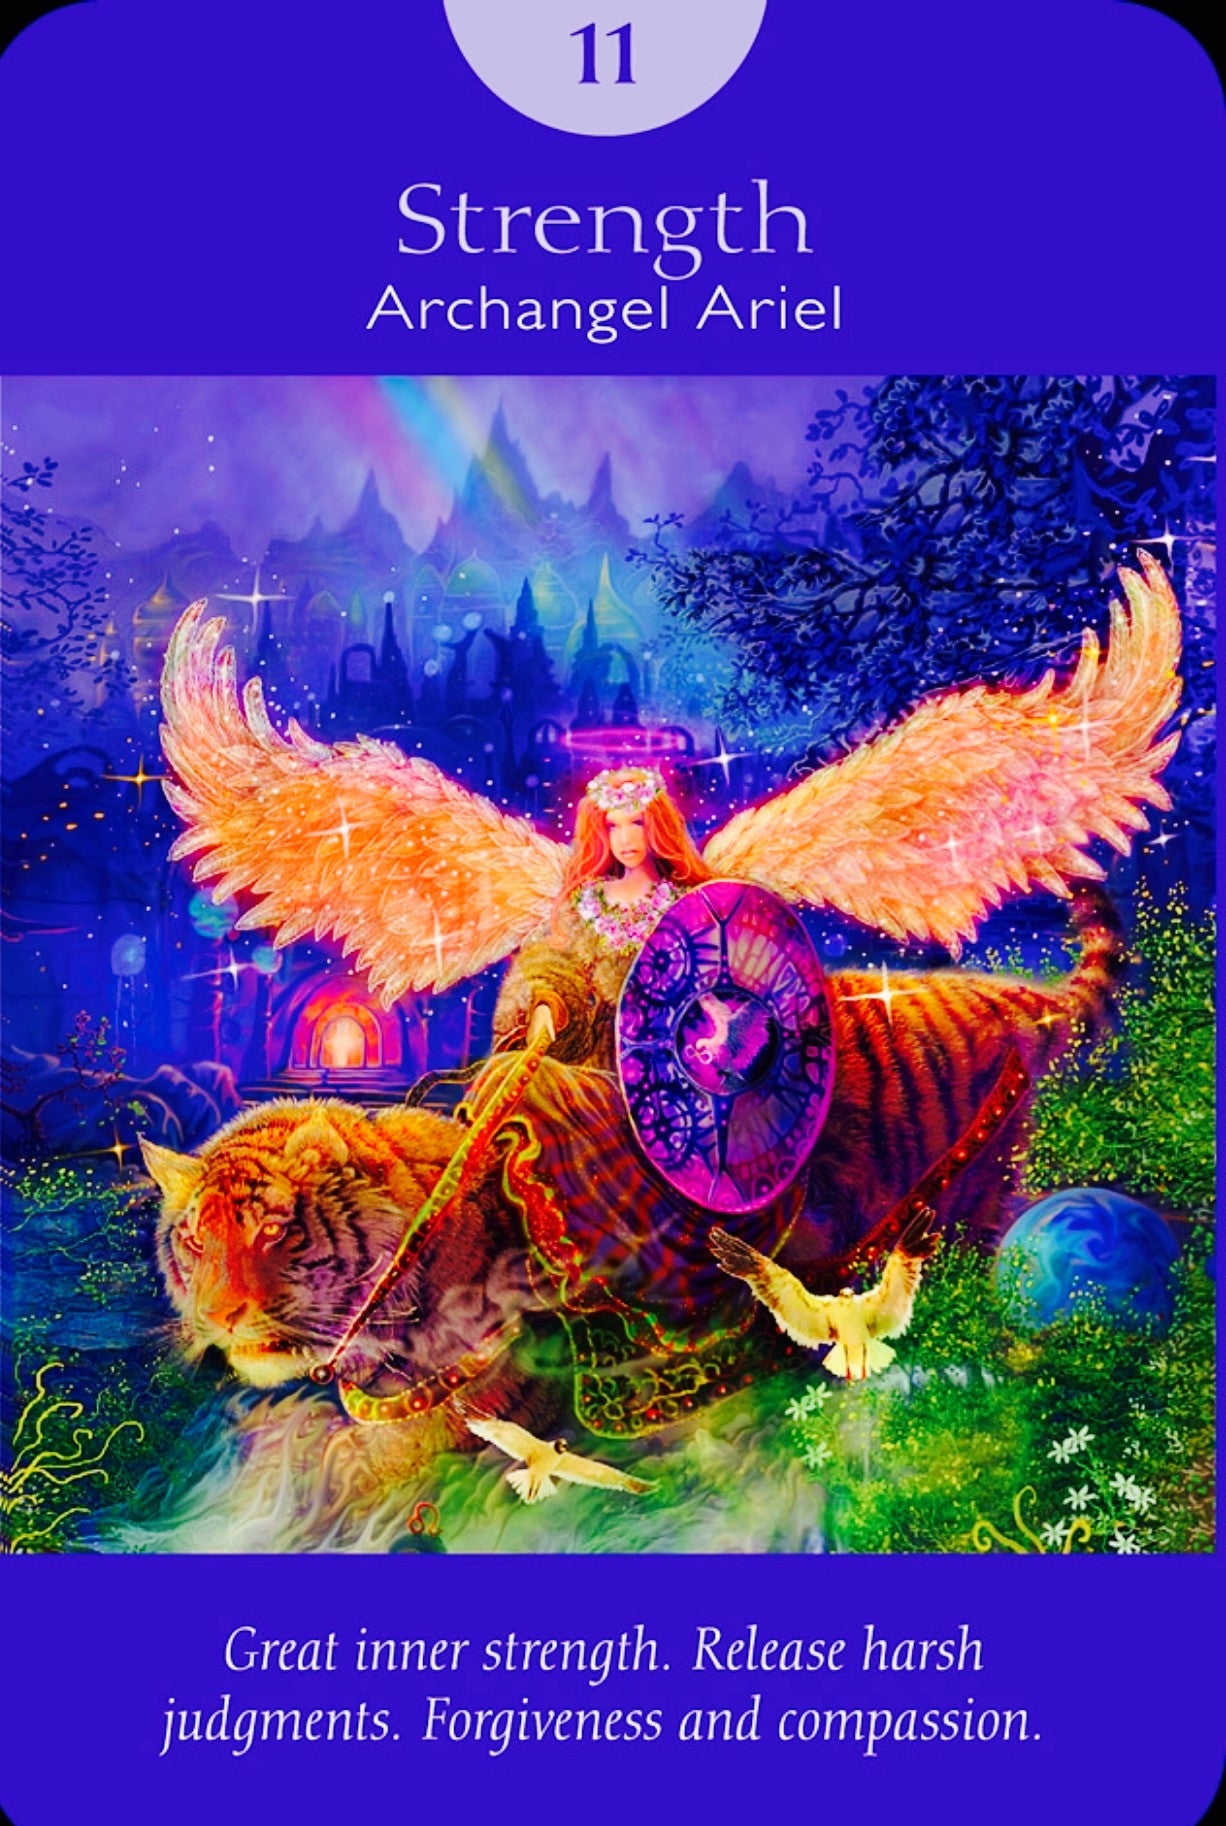 Archangel Ariel: “Great inner strength. Release harsh judgements. Forgiveness and compassion.